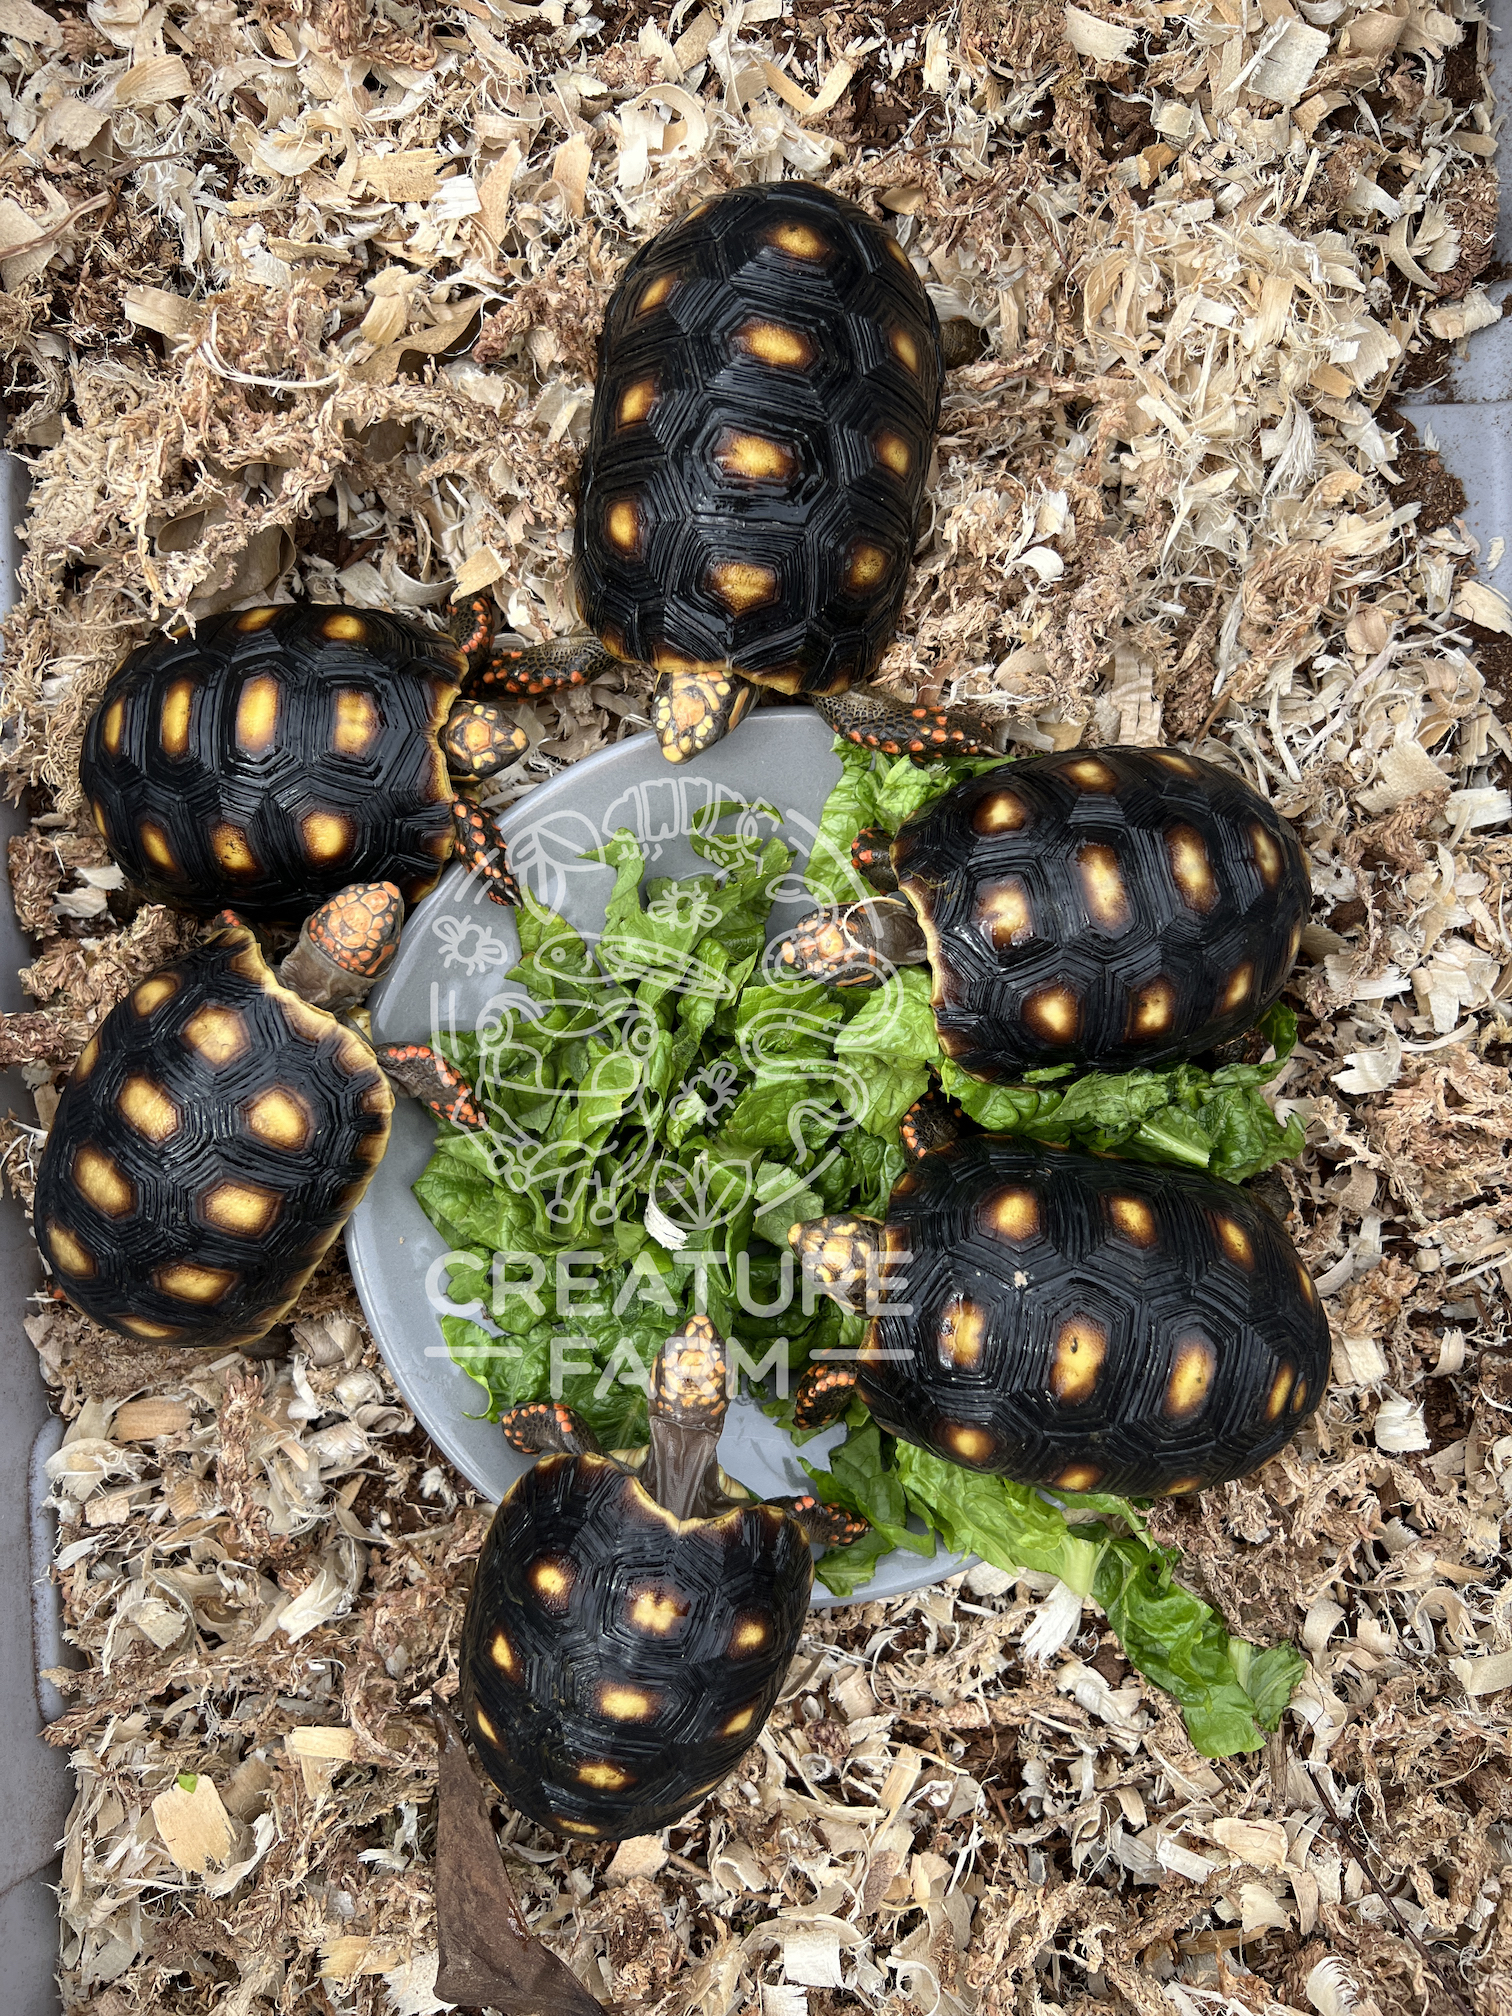 Six baby red footed tortoises around a plate of lettuce